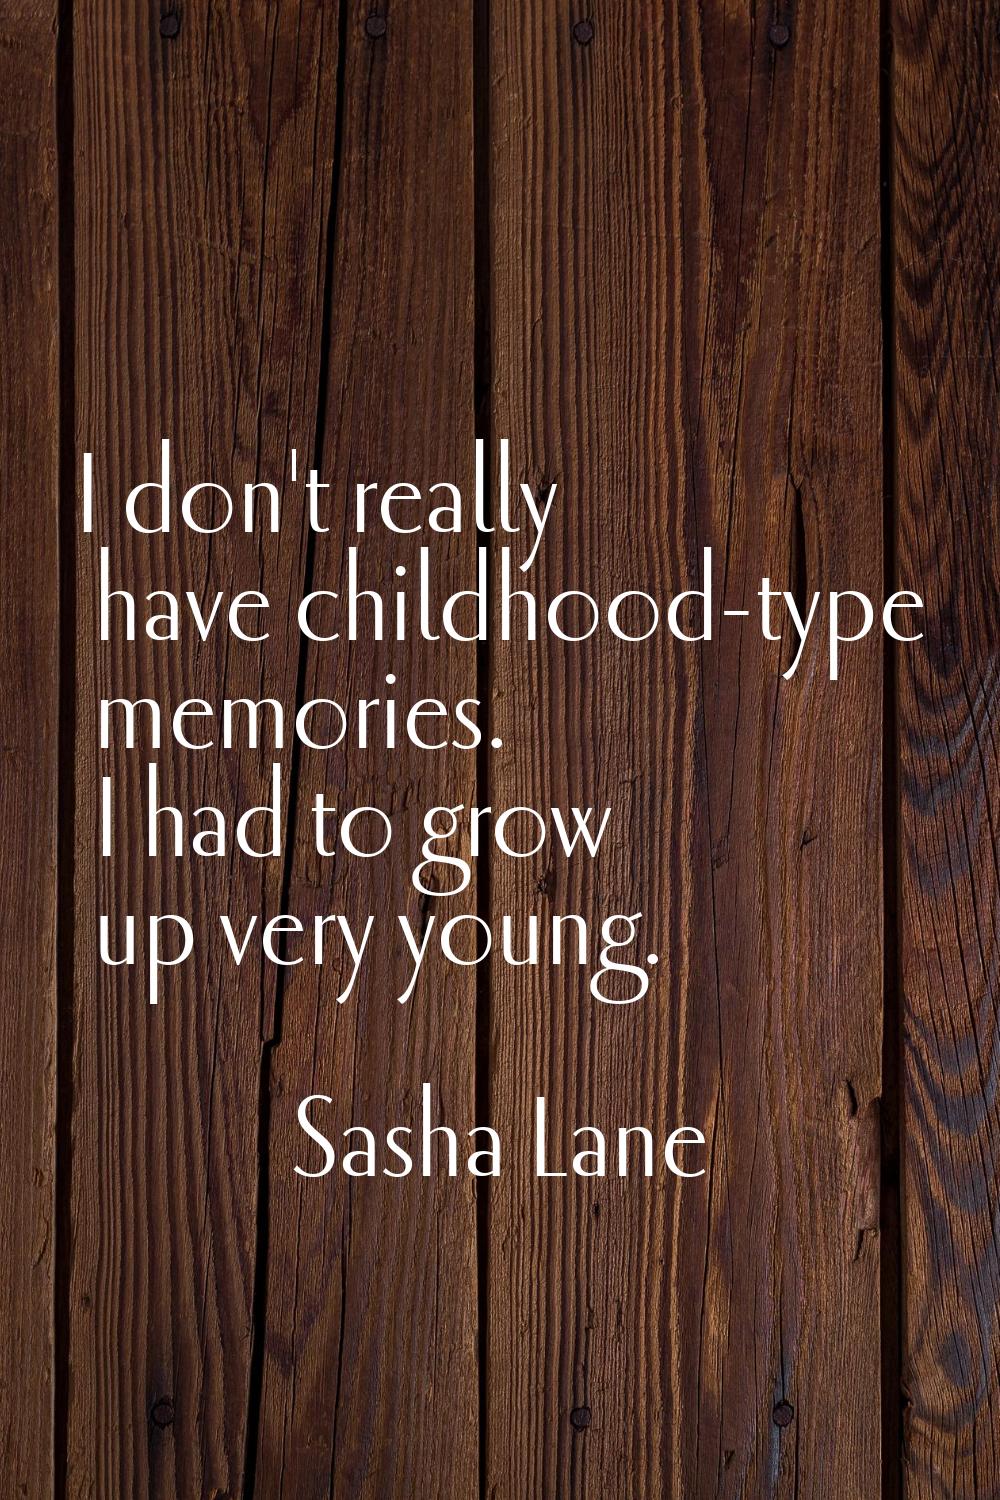 I don't really have childhood-type memories. I had to grow up very young.